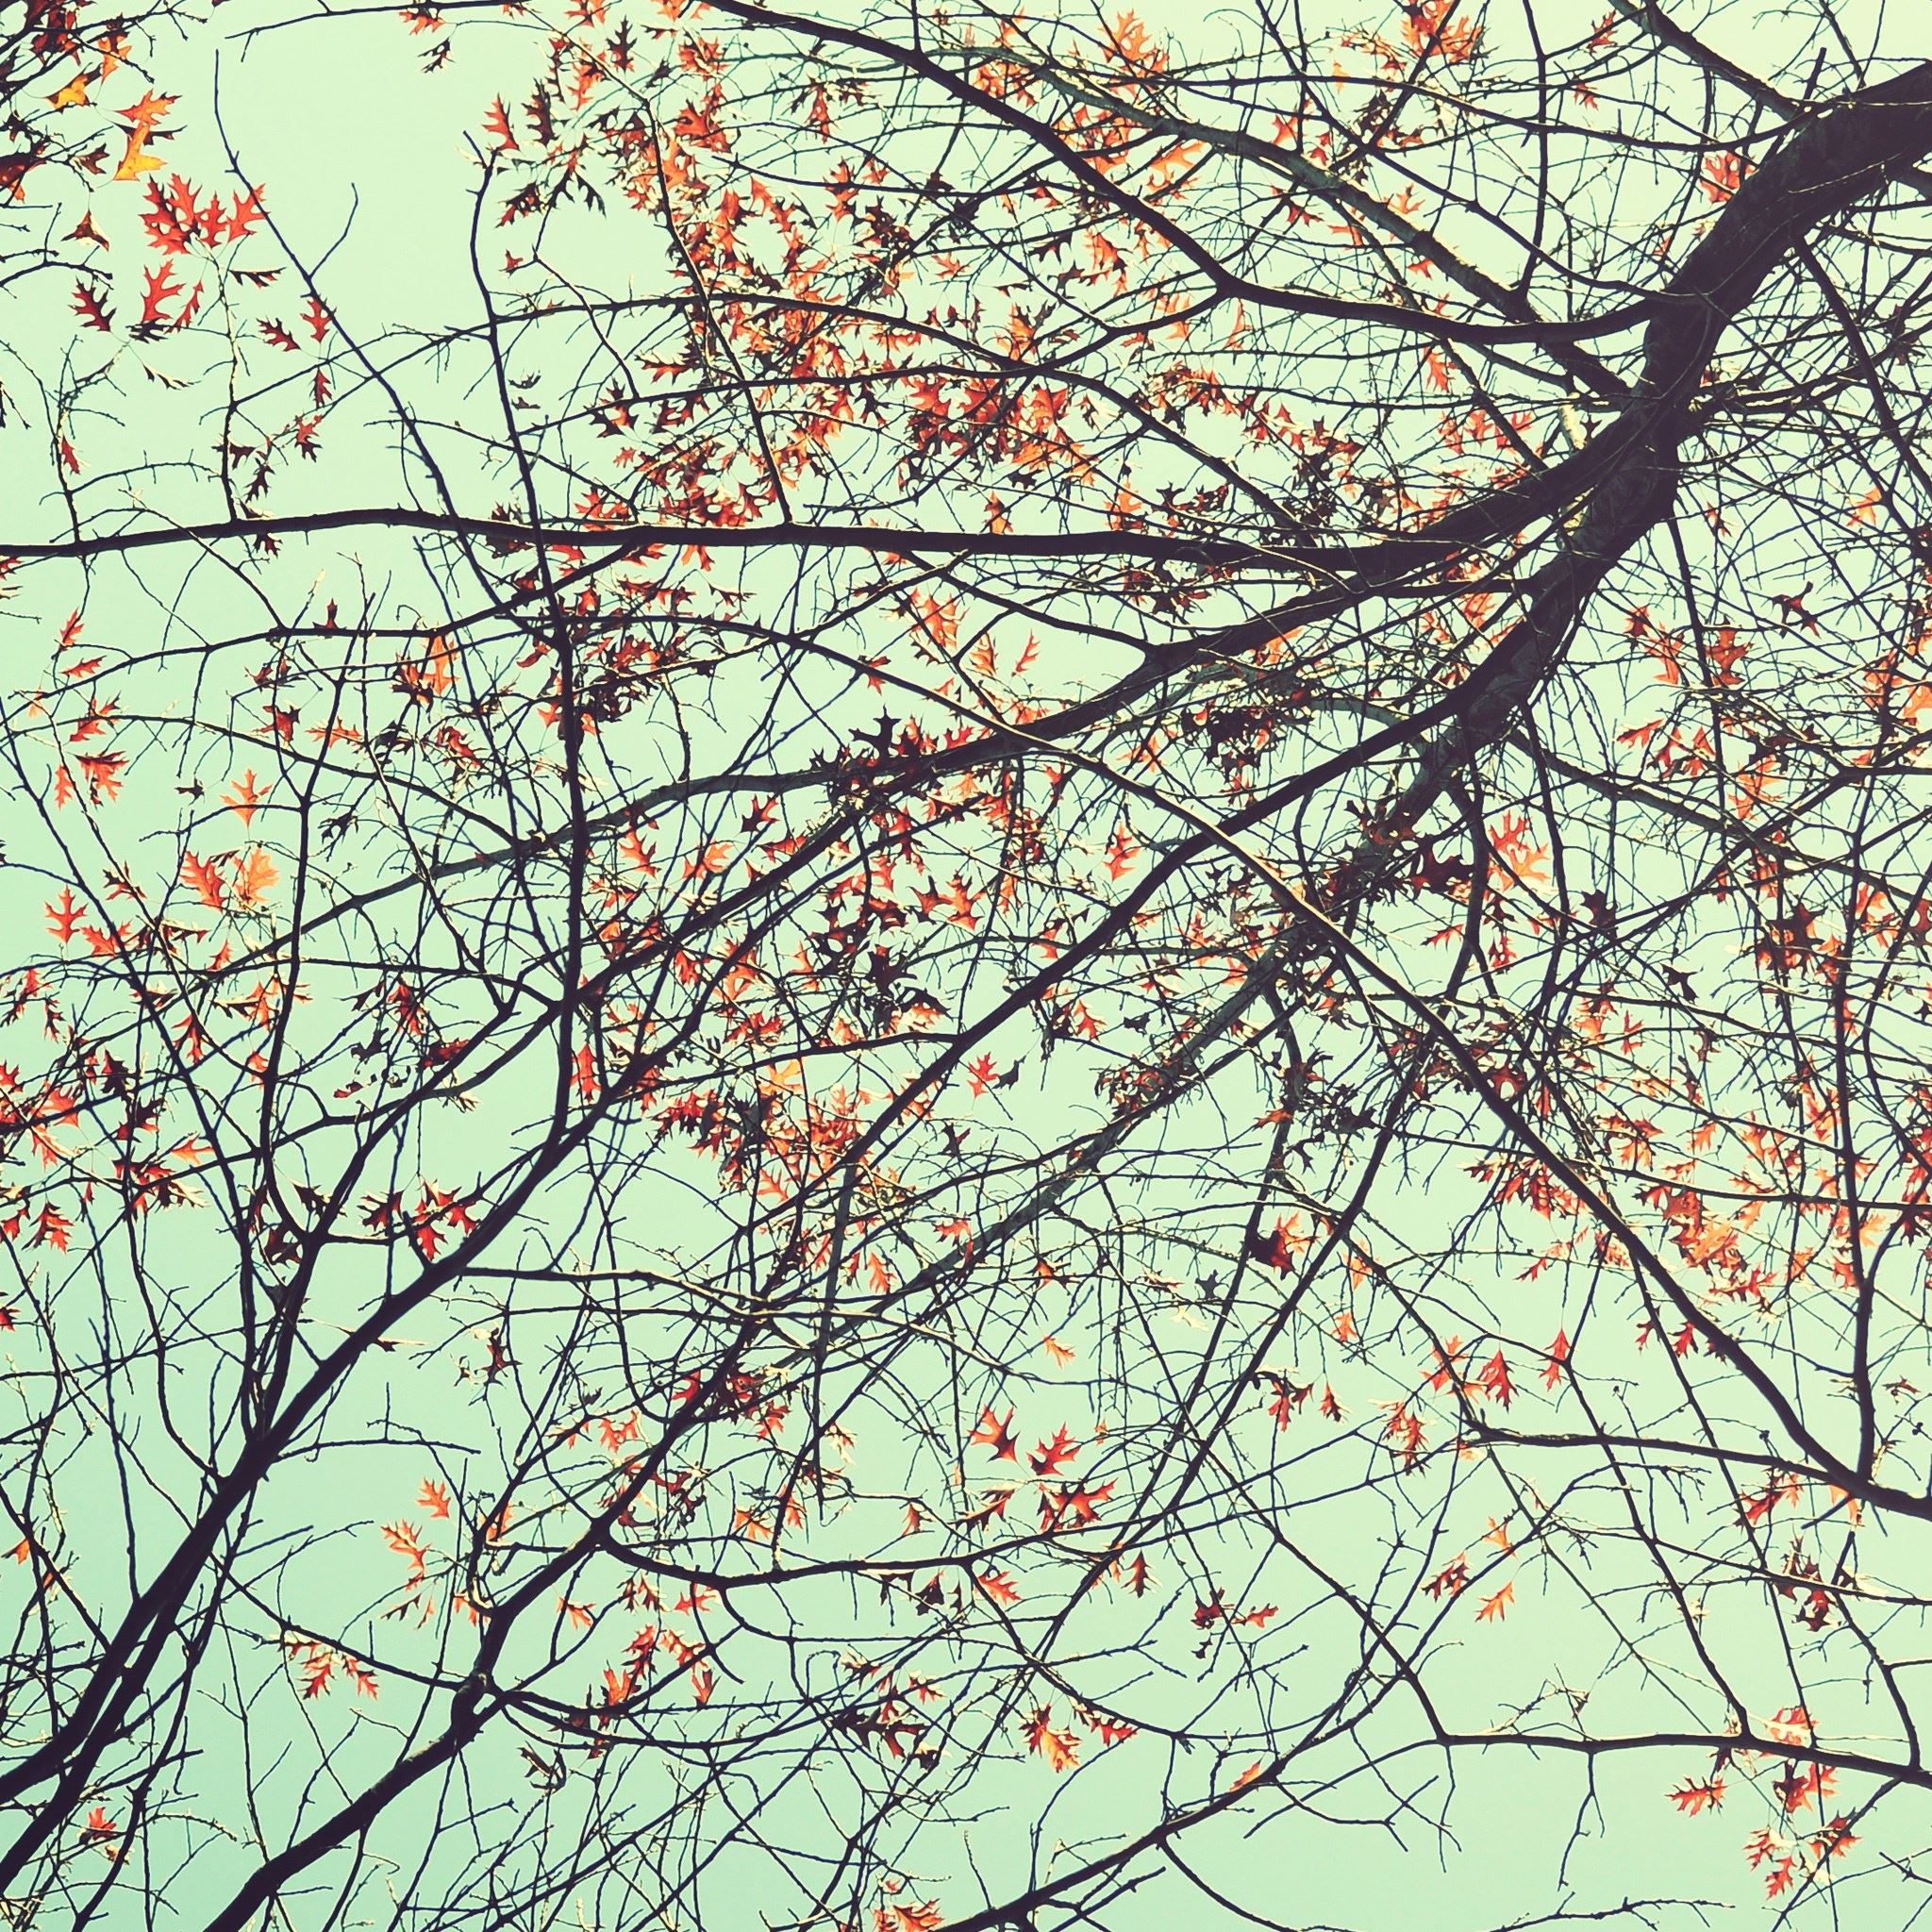 Autumn Cool Sparse Branch Twig Sky View iPad Air wallpaper 